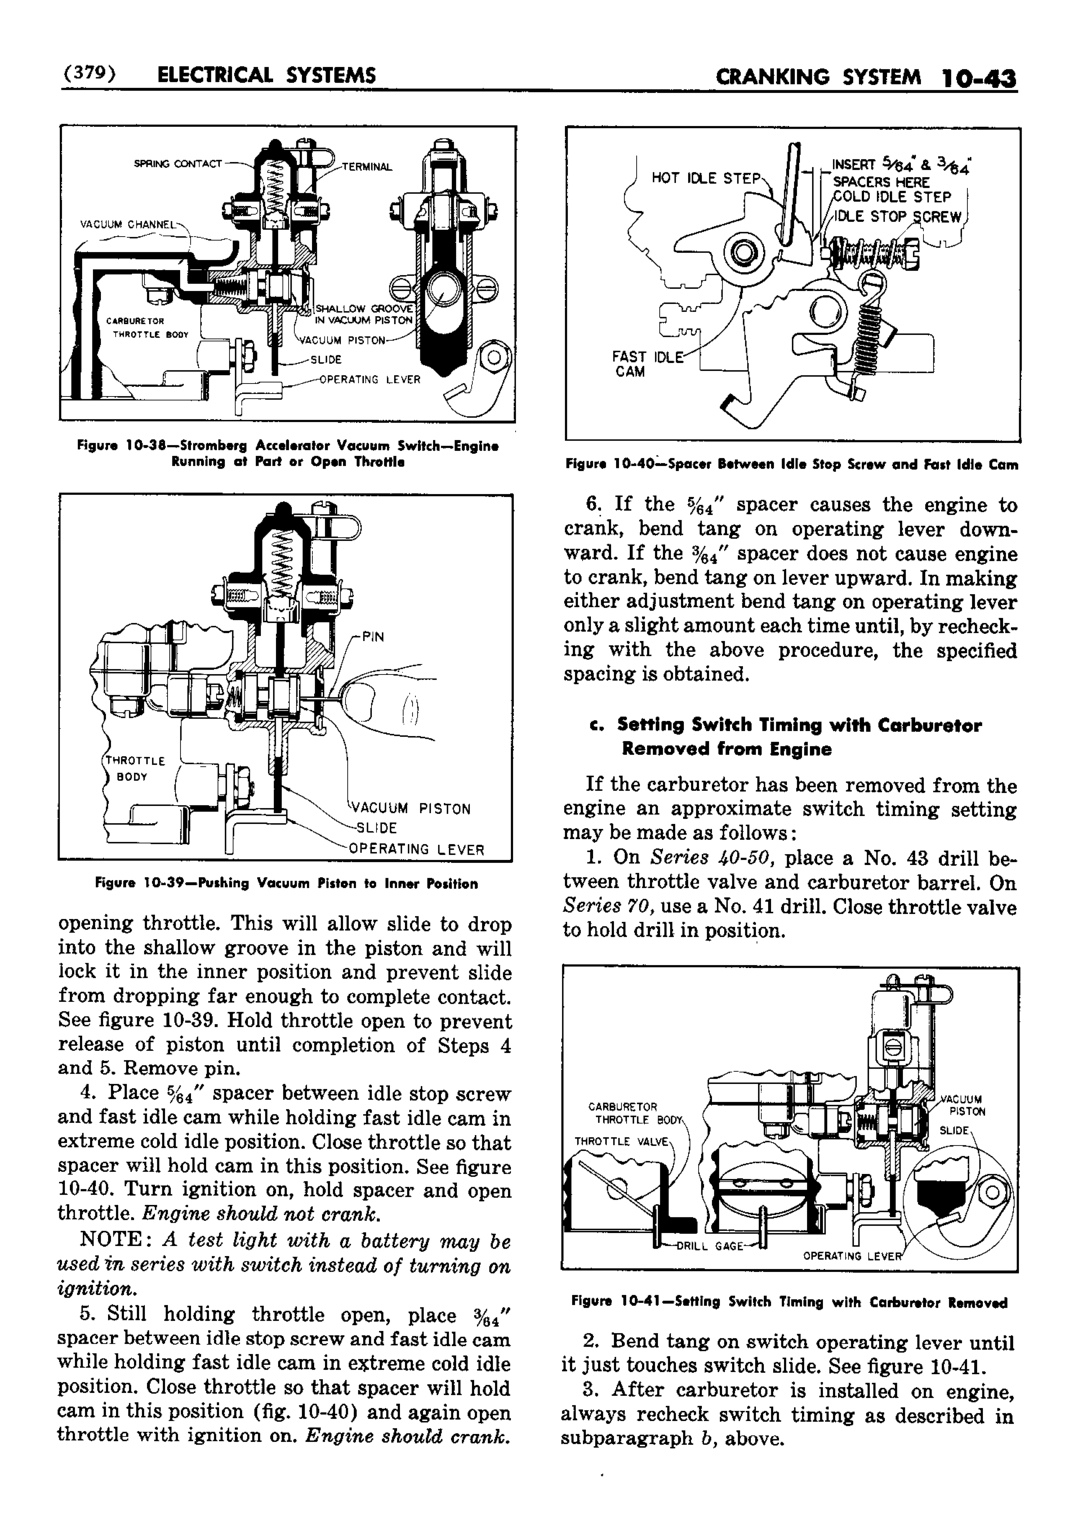 n_11 1952 Buick Shop Manual - Electrical Systems-043-043.jpg